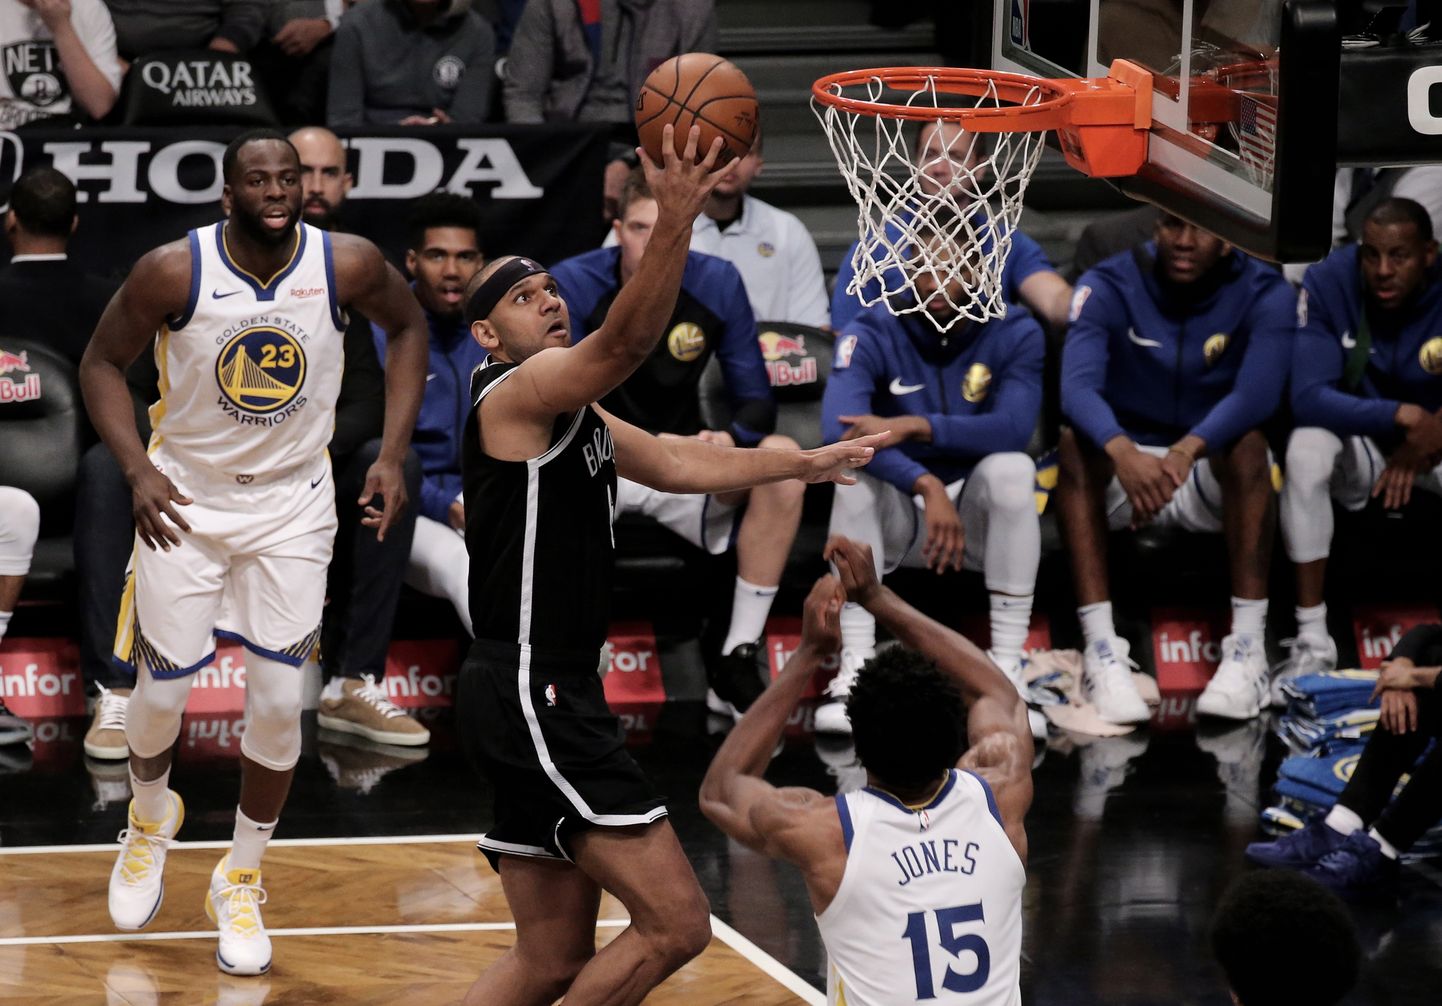 Brooklyn Nets' forward jared Dudley (C) shoots over Golden State Warriors guard Damon Jones (R) in the second half of their NBA basketball at Barclays Center in Brooklyn, New York, USA, 28 October 2018.  EPA/PETER FOLEY SHUTTERSTOCK OUT